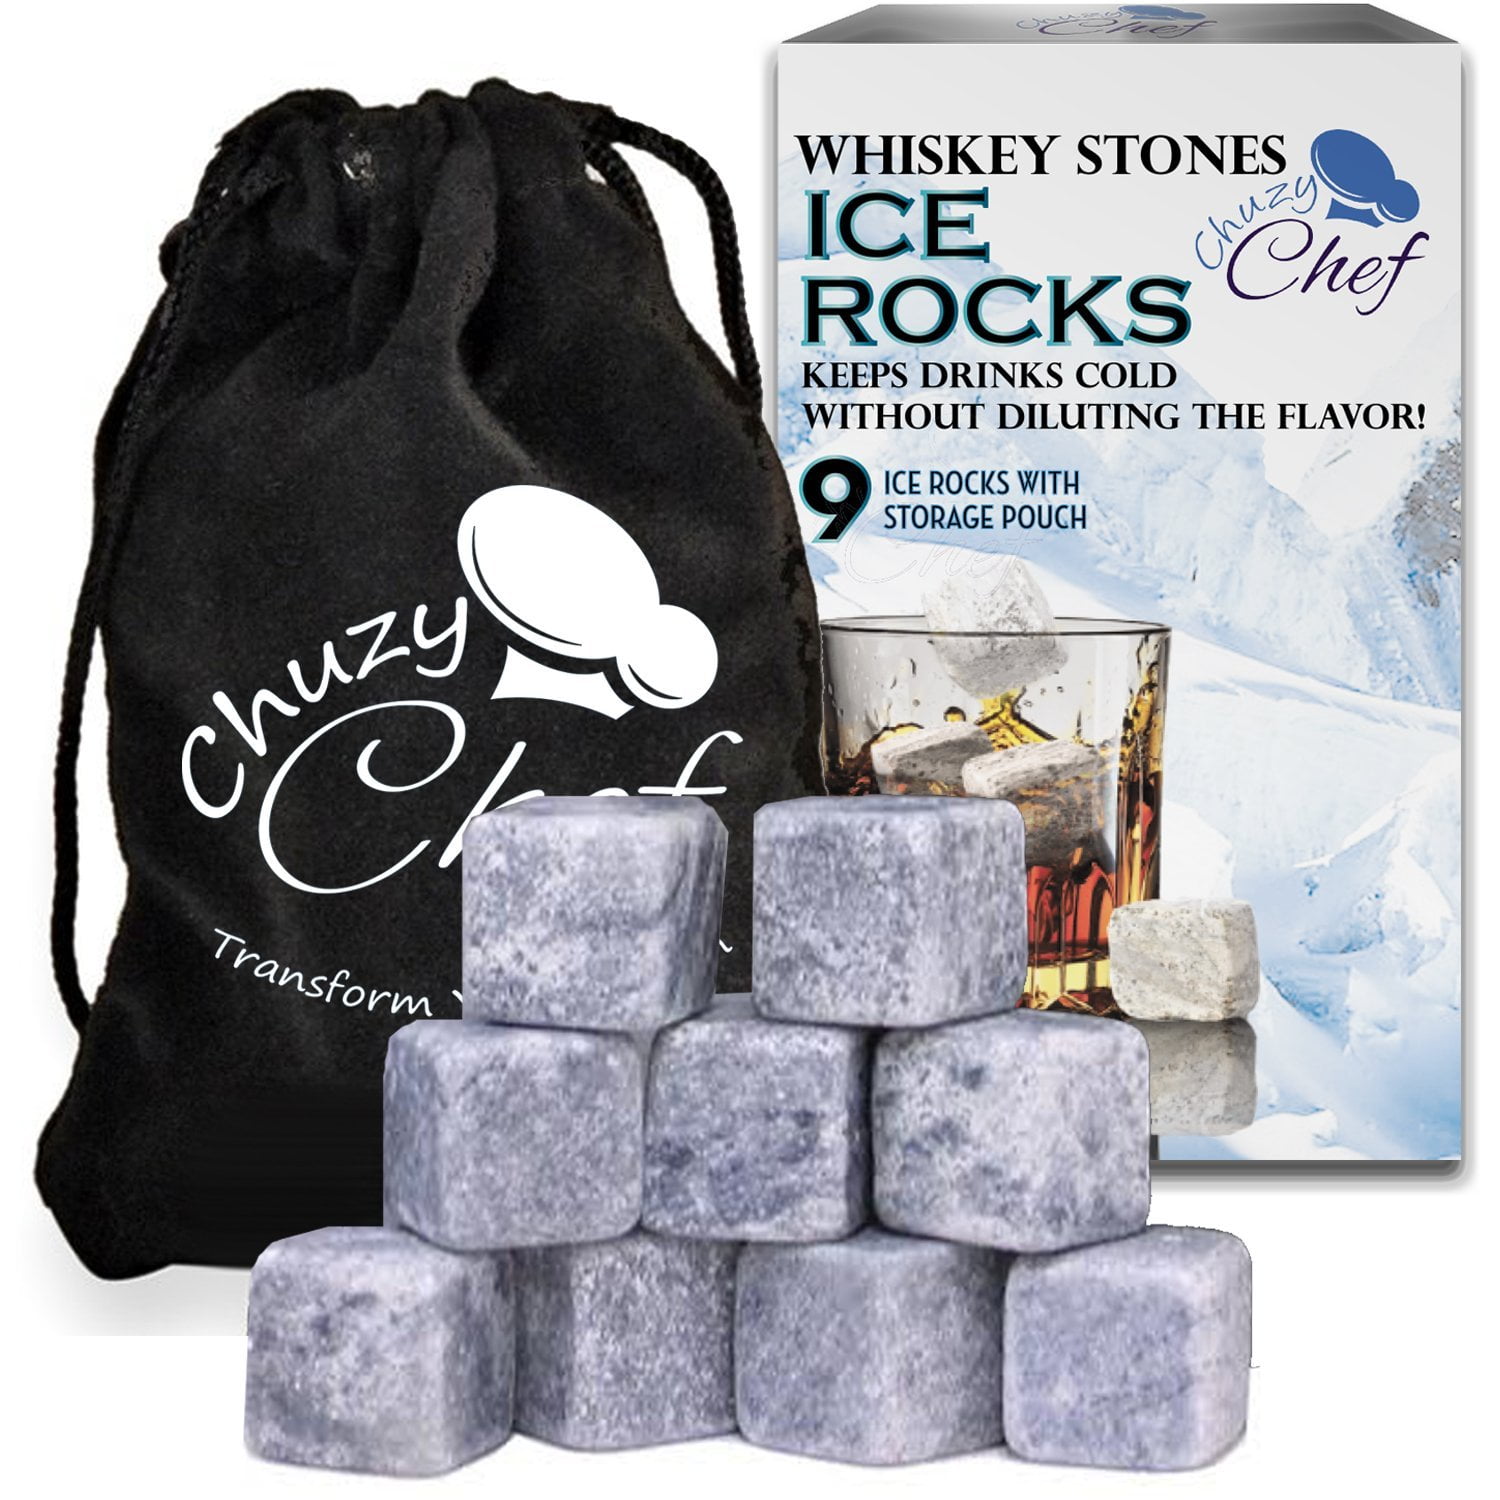 Soapstone Whisky Chilling Rocks Ice Cubes Drink 9 pack 